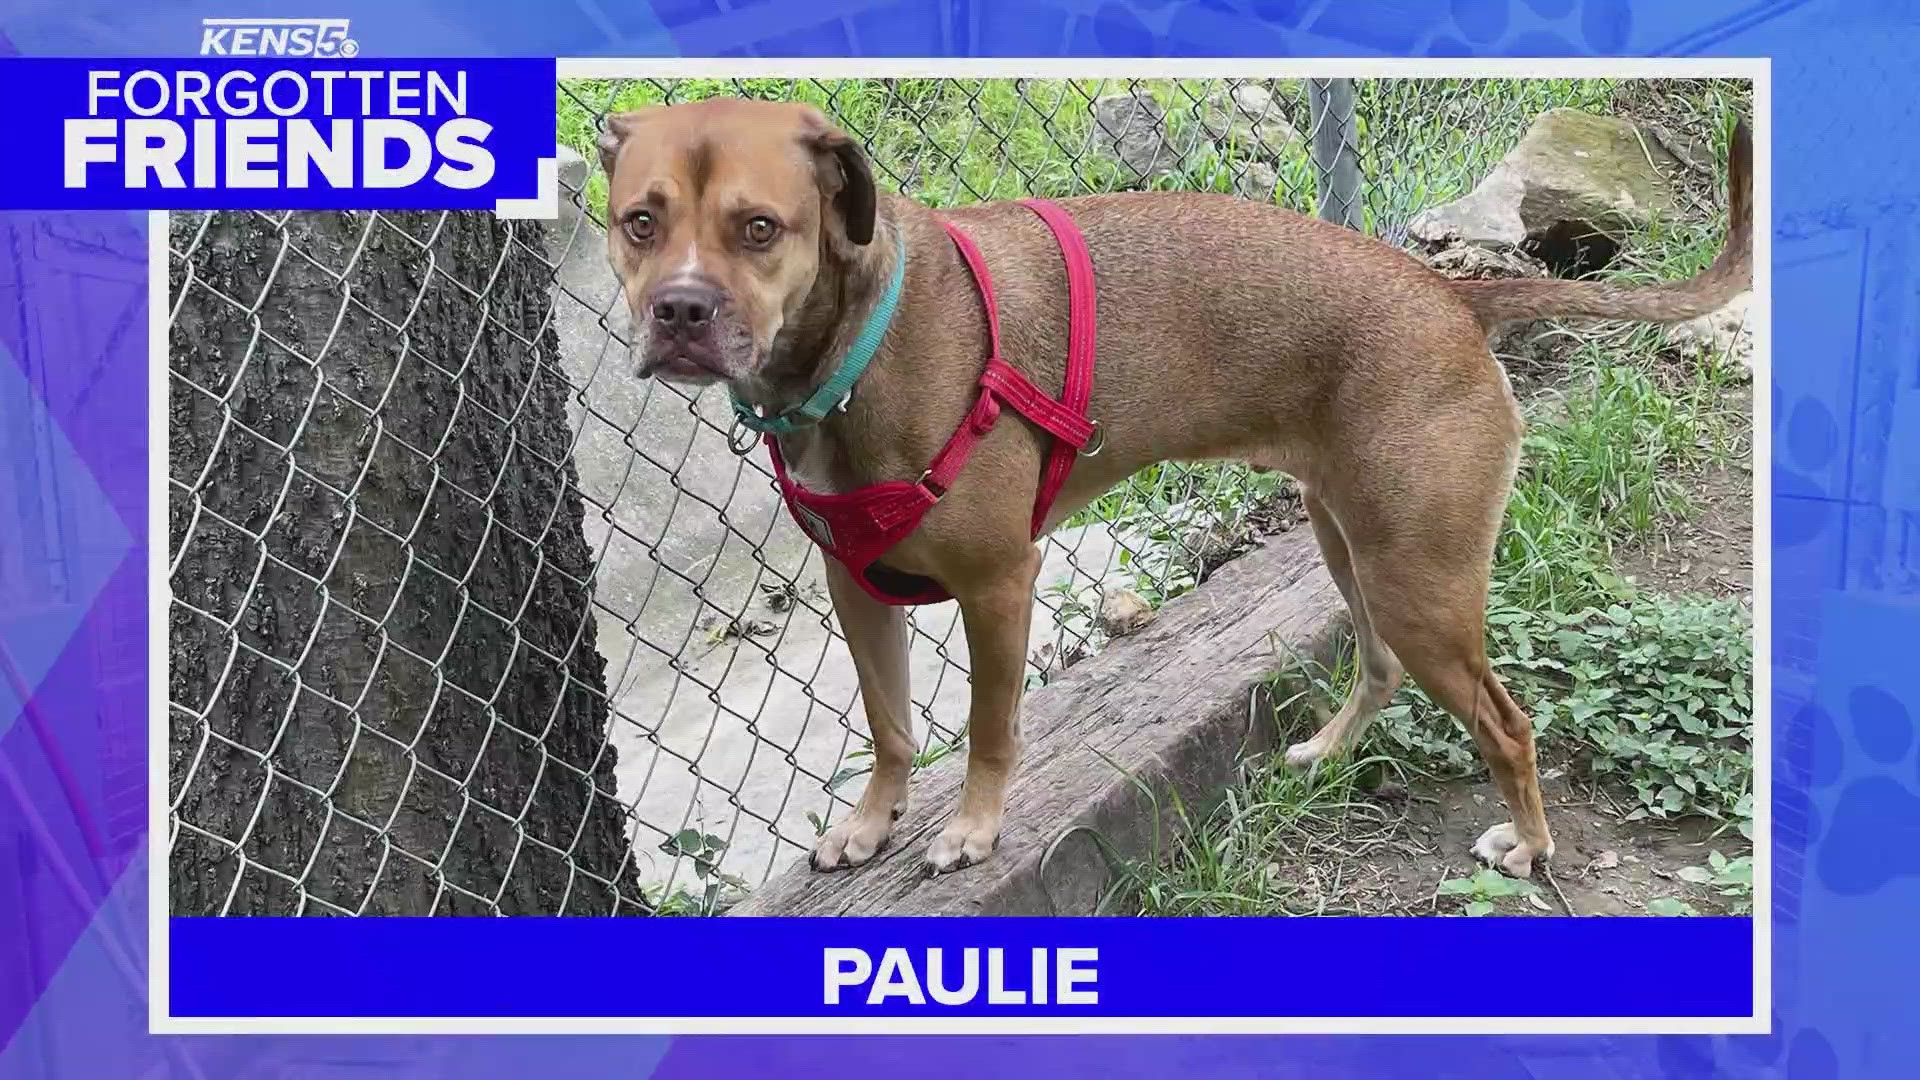 Paulie is a true warrior who survived some serious injuries and now he's ready for his own human to love.